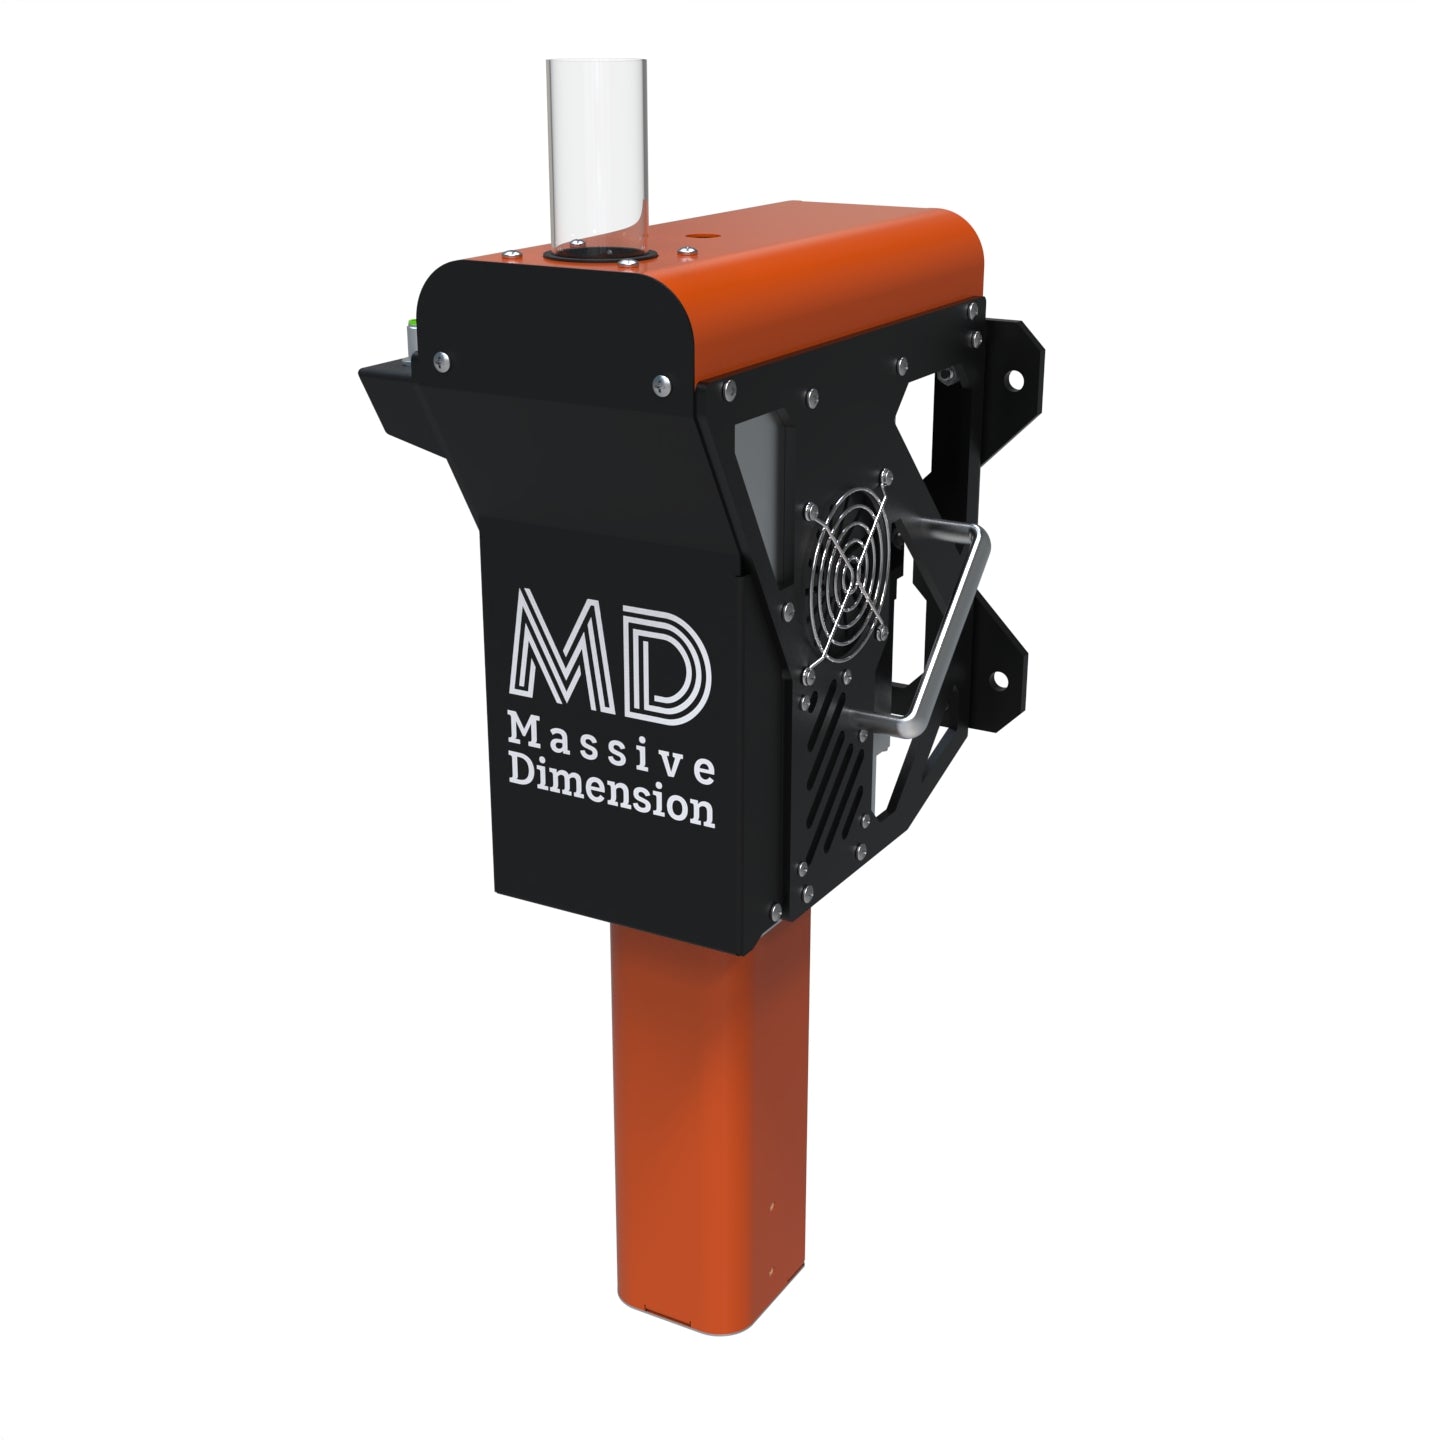 MDPE10 Direct Print Particle Extruder Now Available!